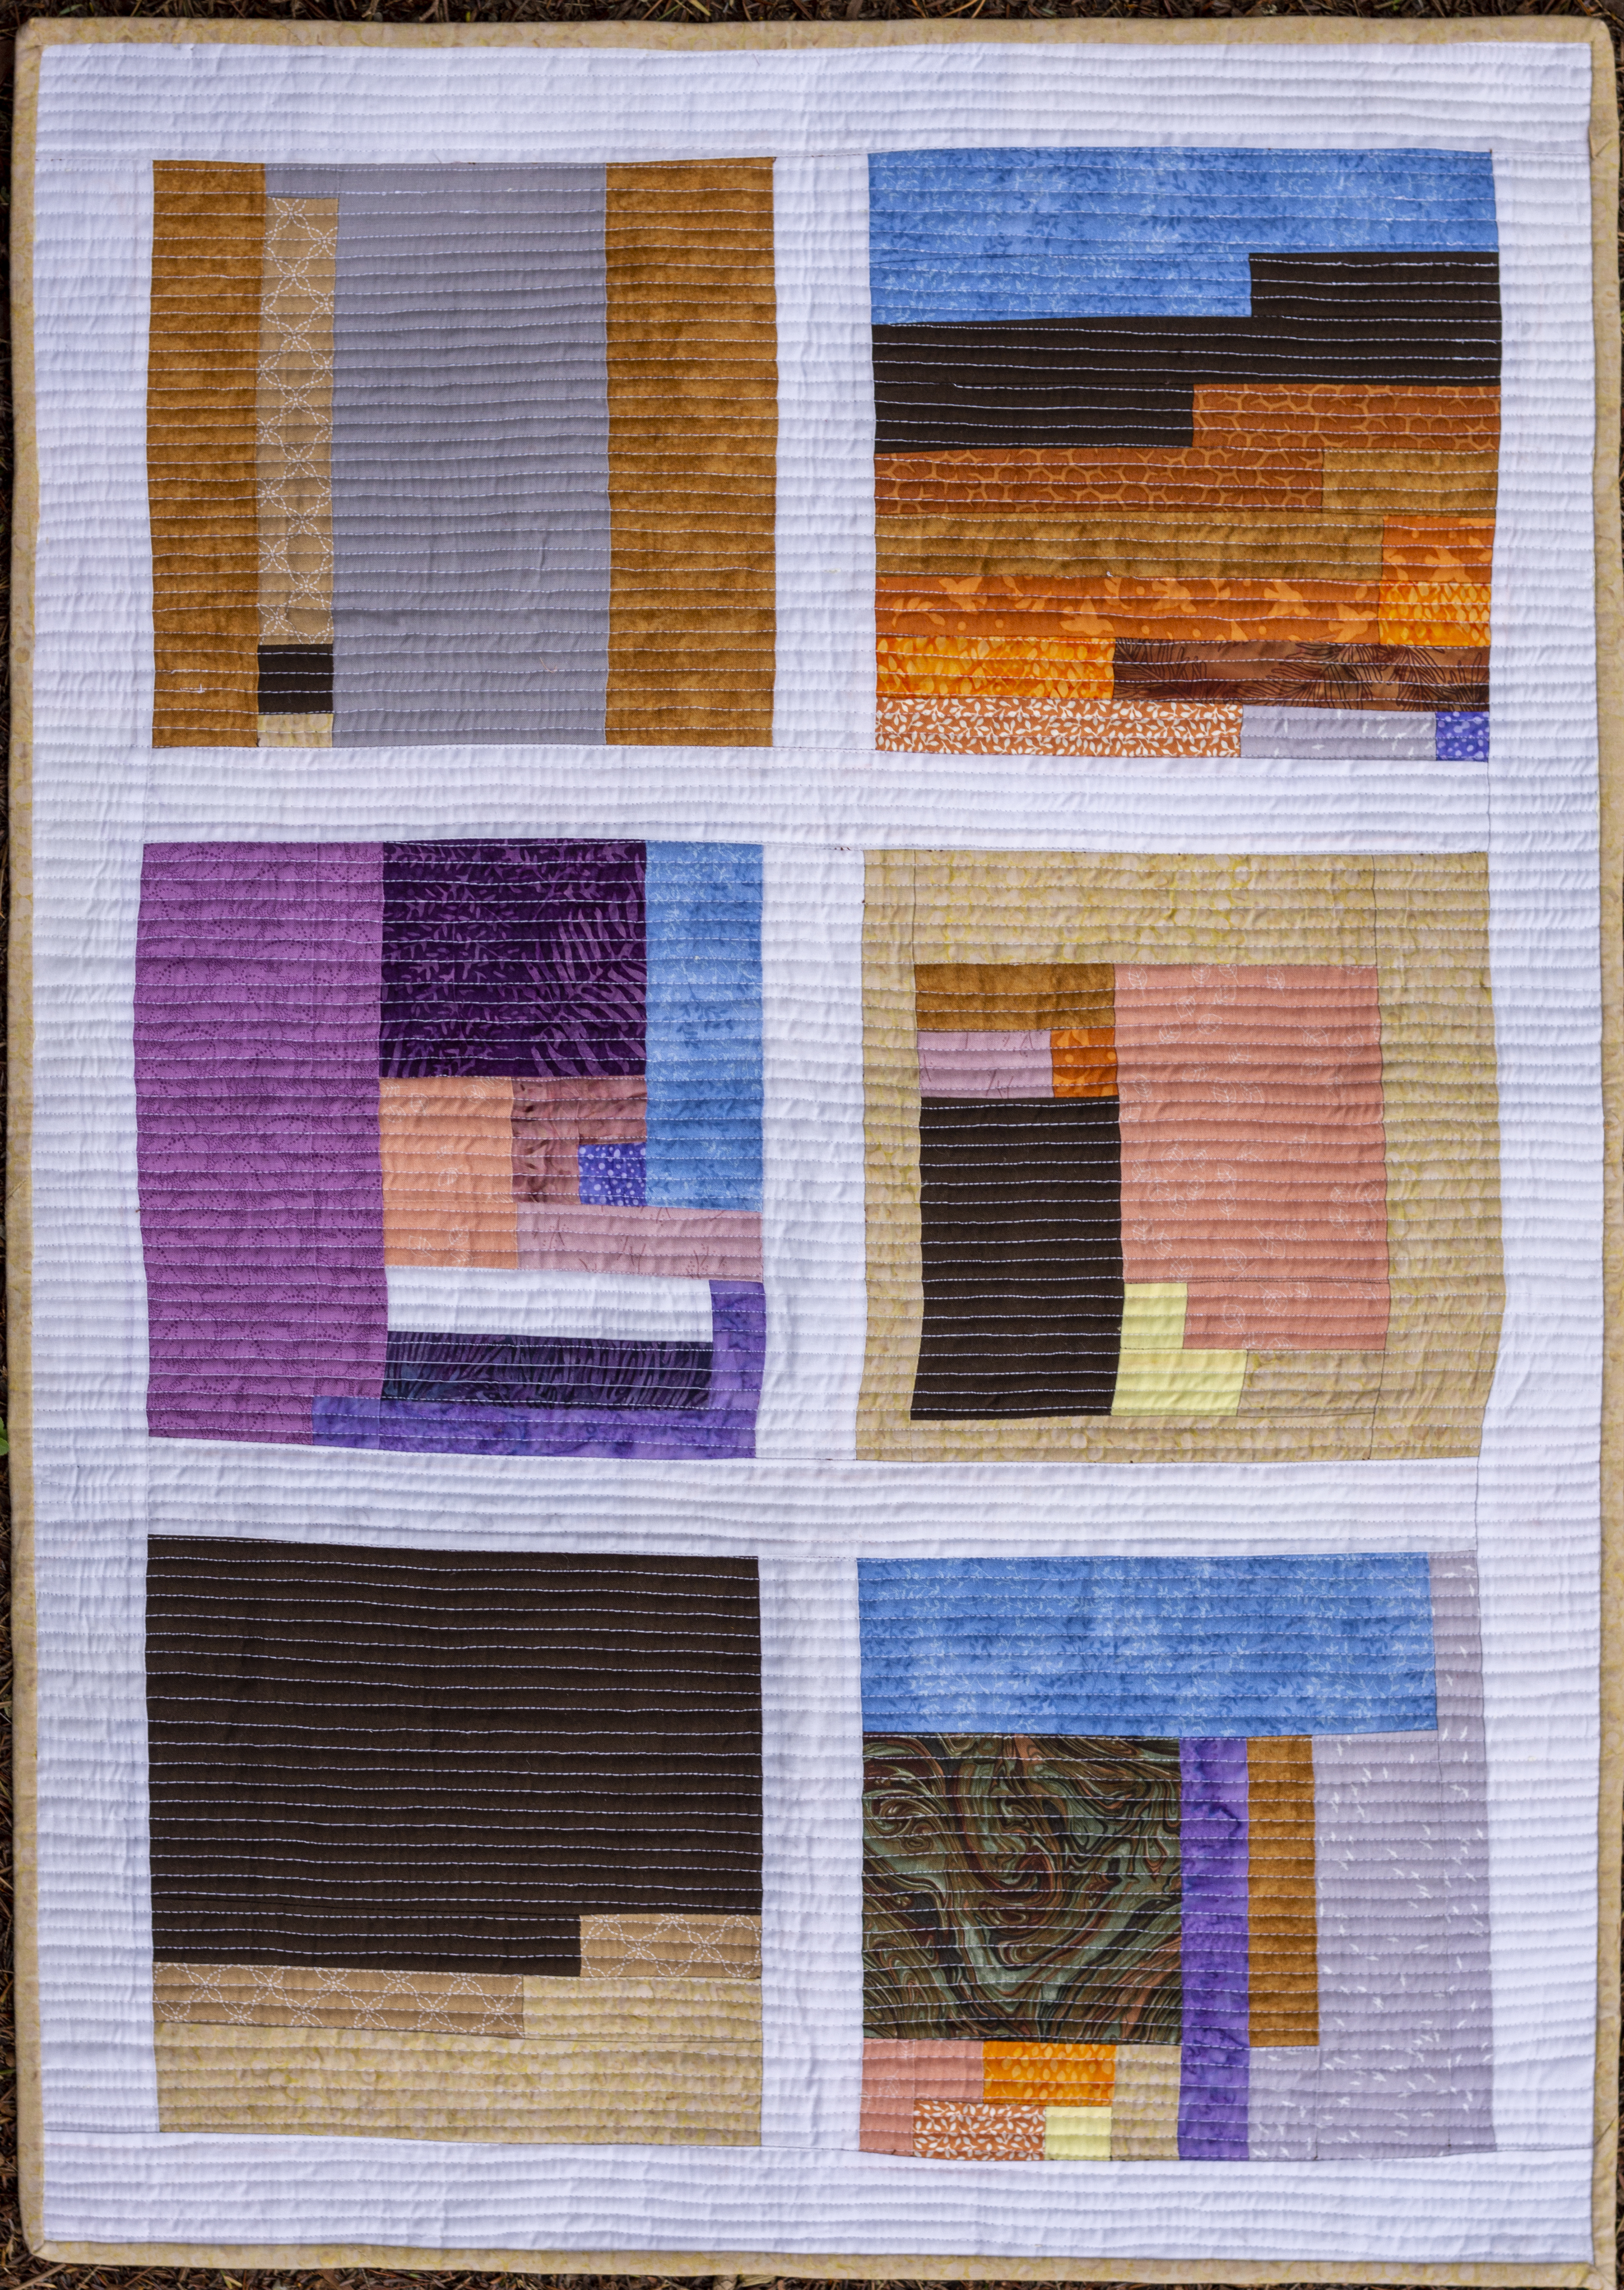 Quilt by Winnie Commers